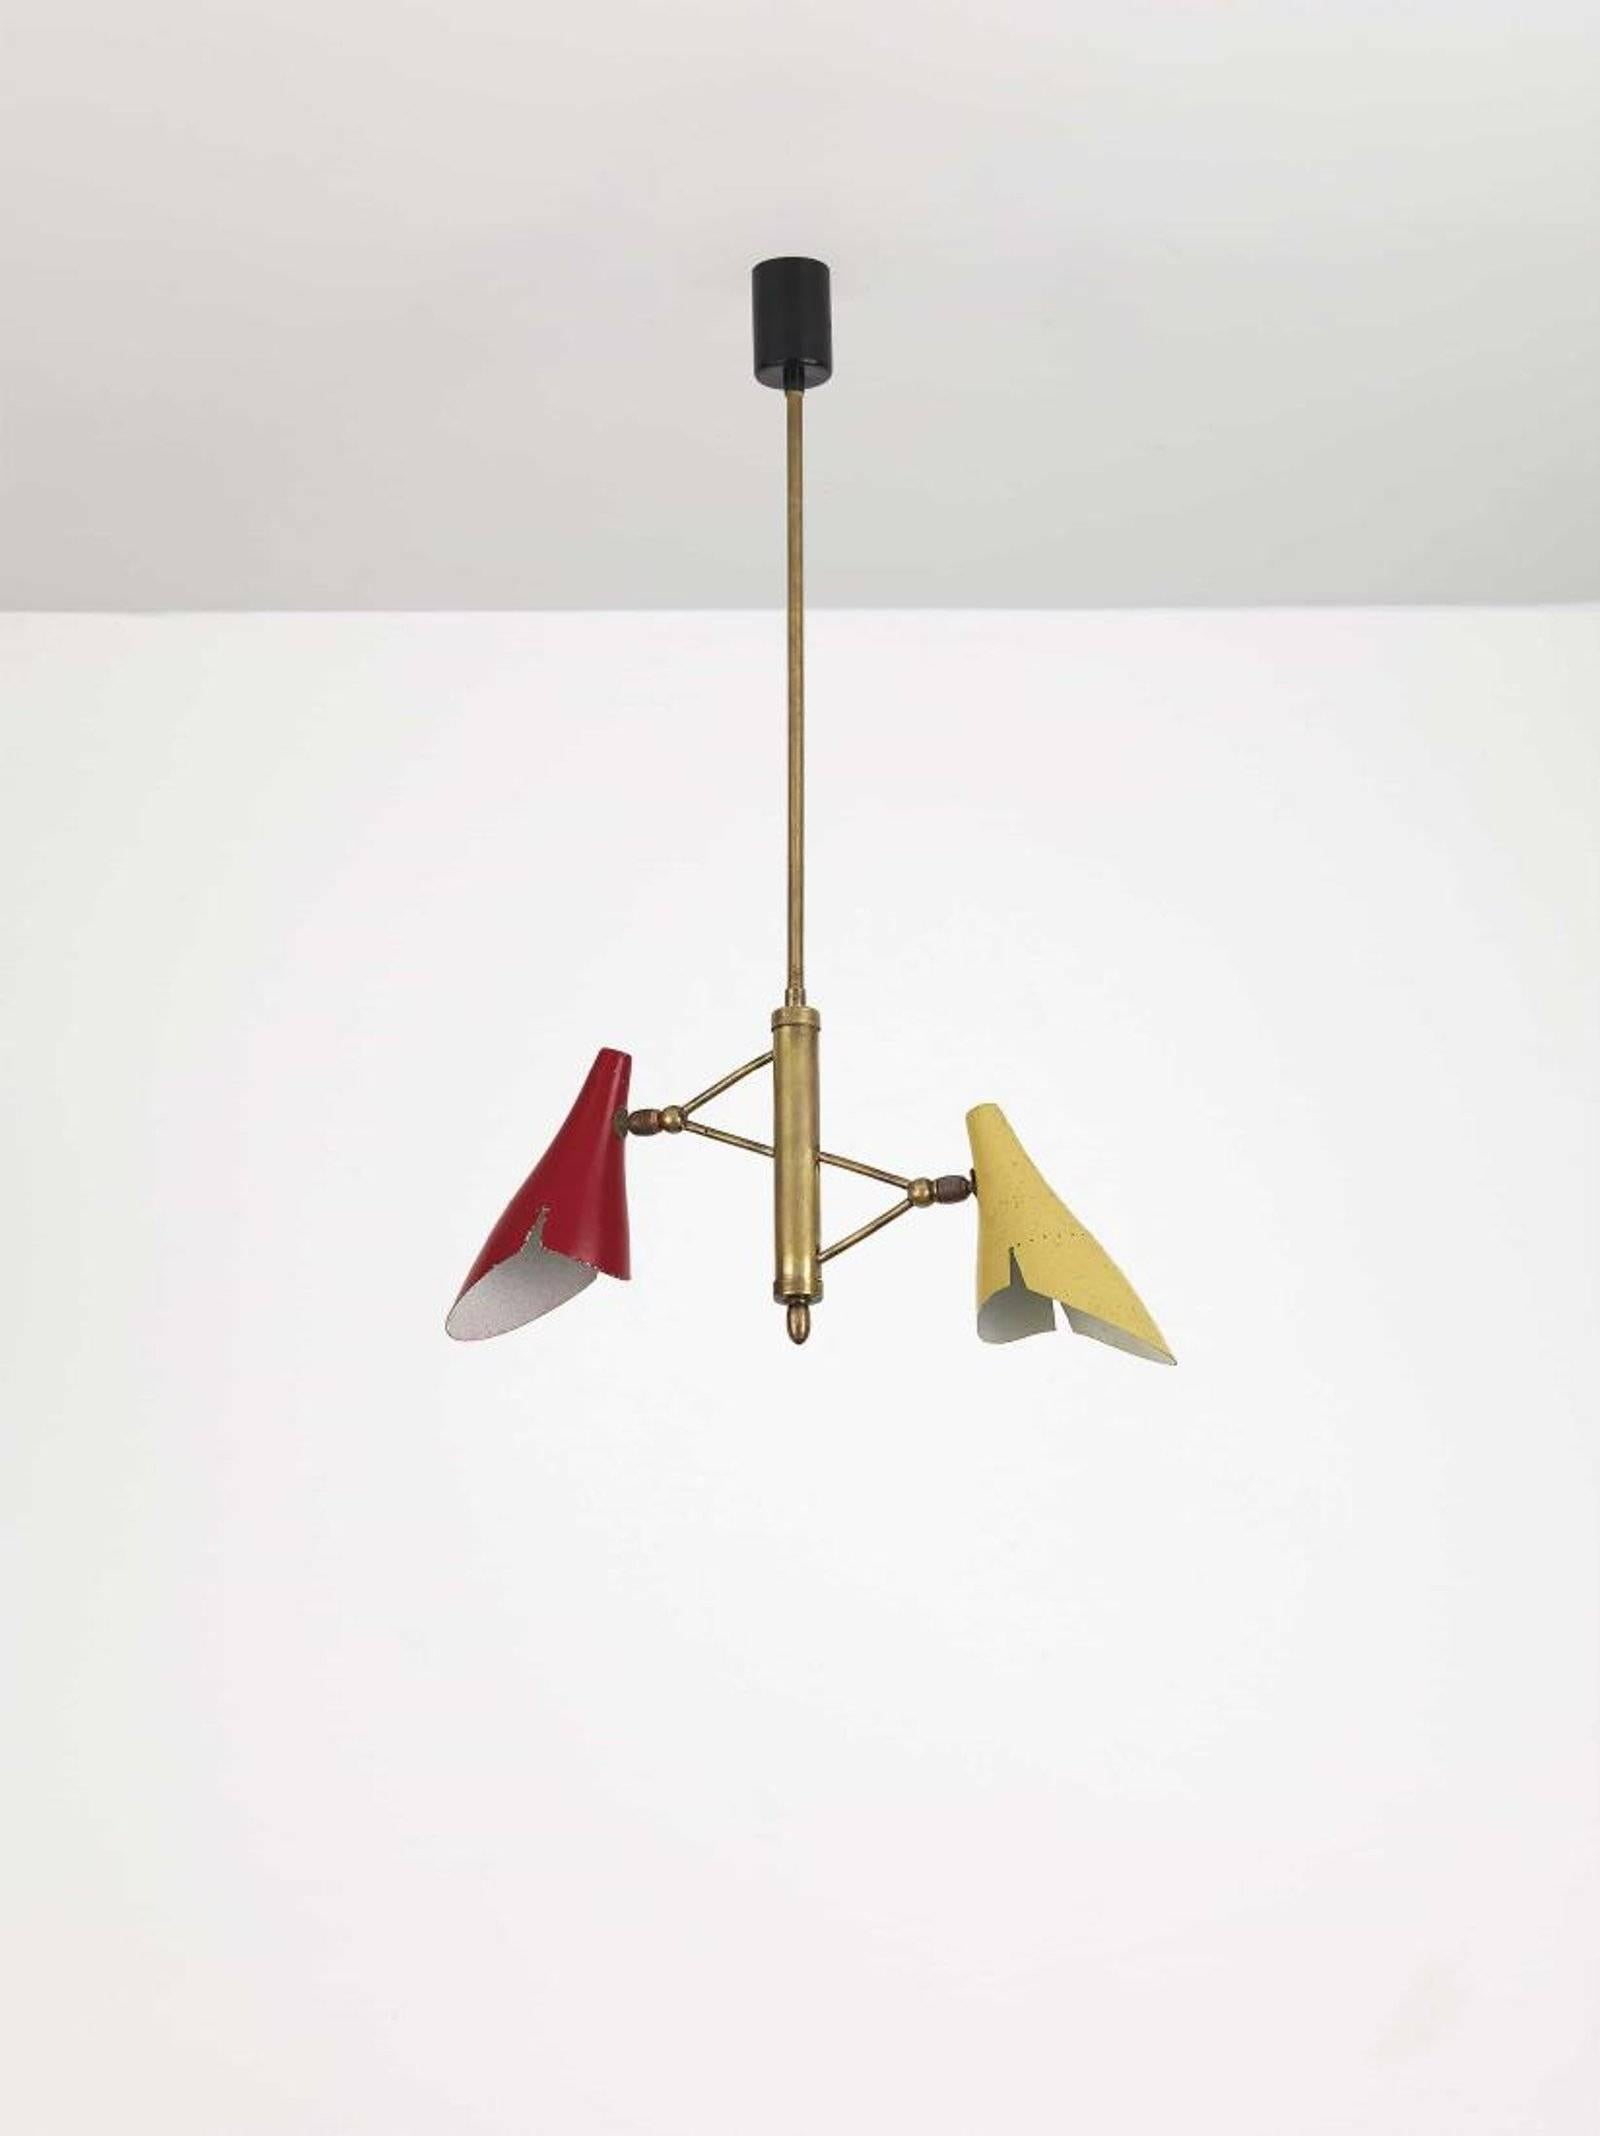 1950s Italian suspension lamp by Oscar Torlasco for Lumen, Milano with brass structure and color enameled distinctively formed aluminum cones. 

See images 12-14 for examples of the more commonly seen table lamp version of this design.